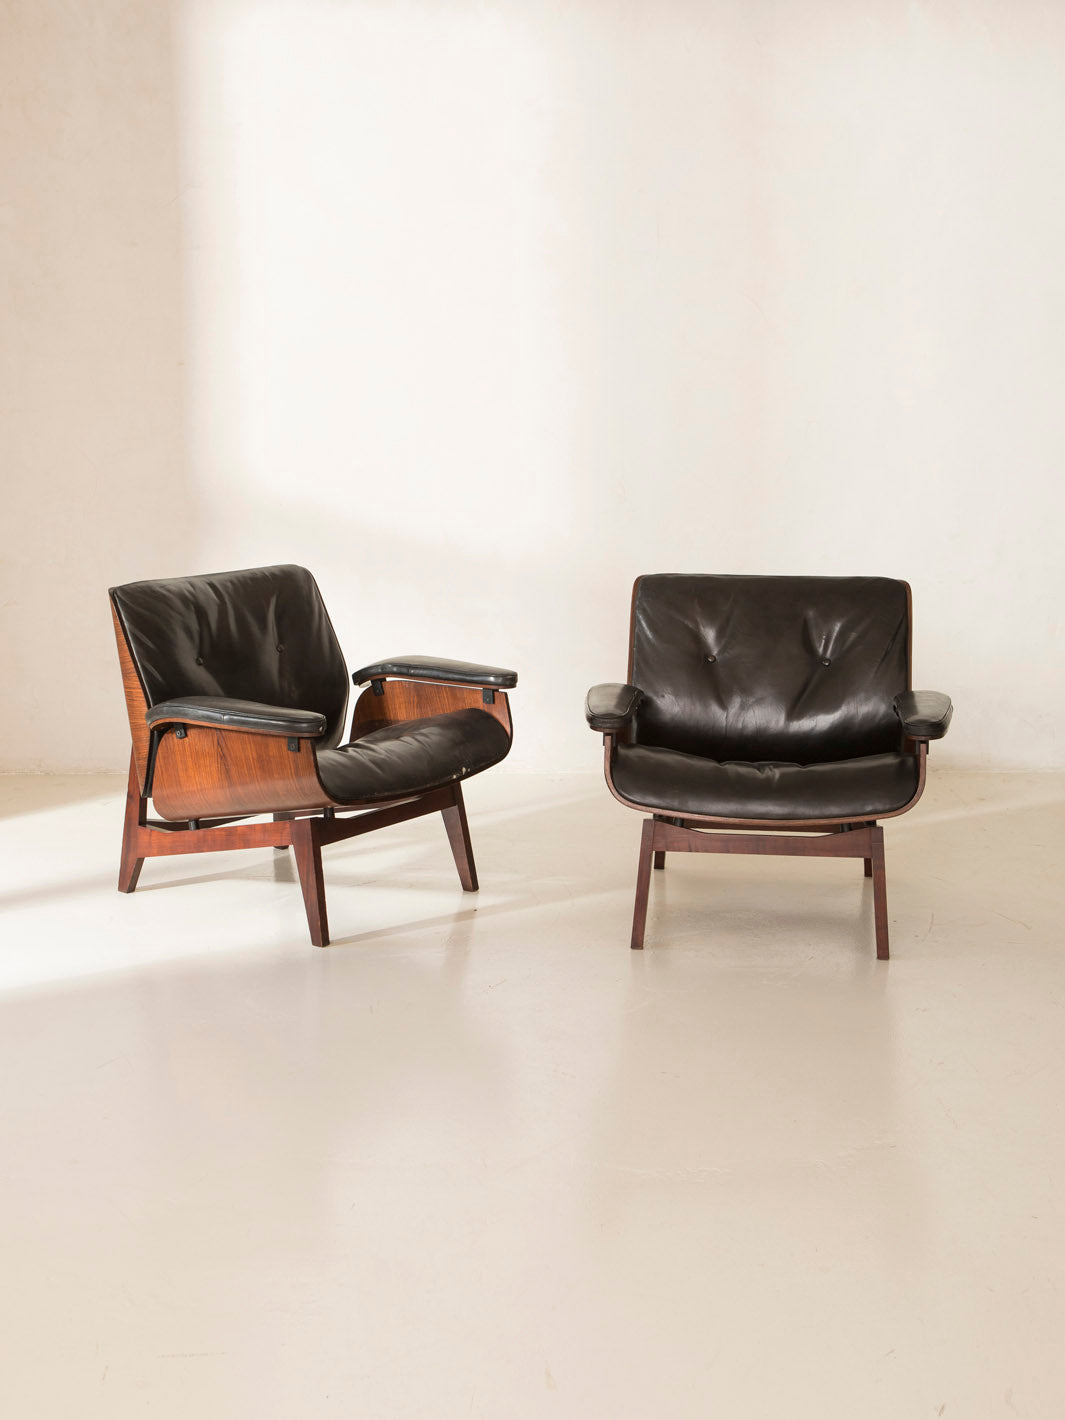 Ico Parisi Mim Roma armchairs from the 60s